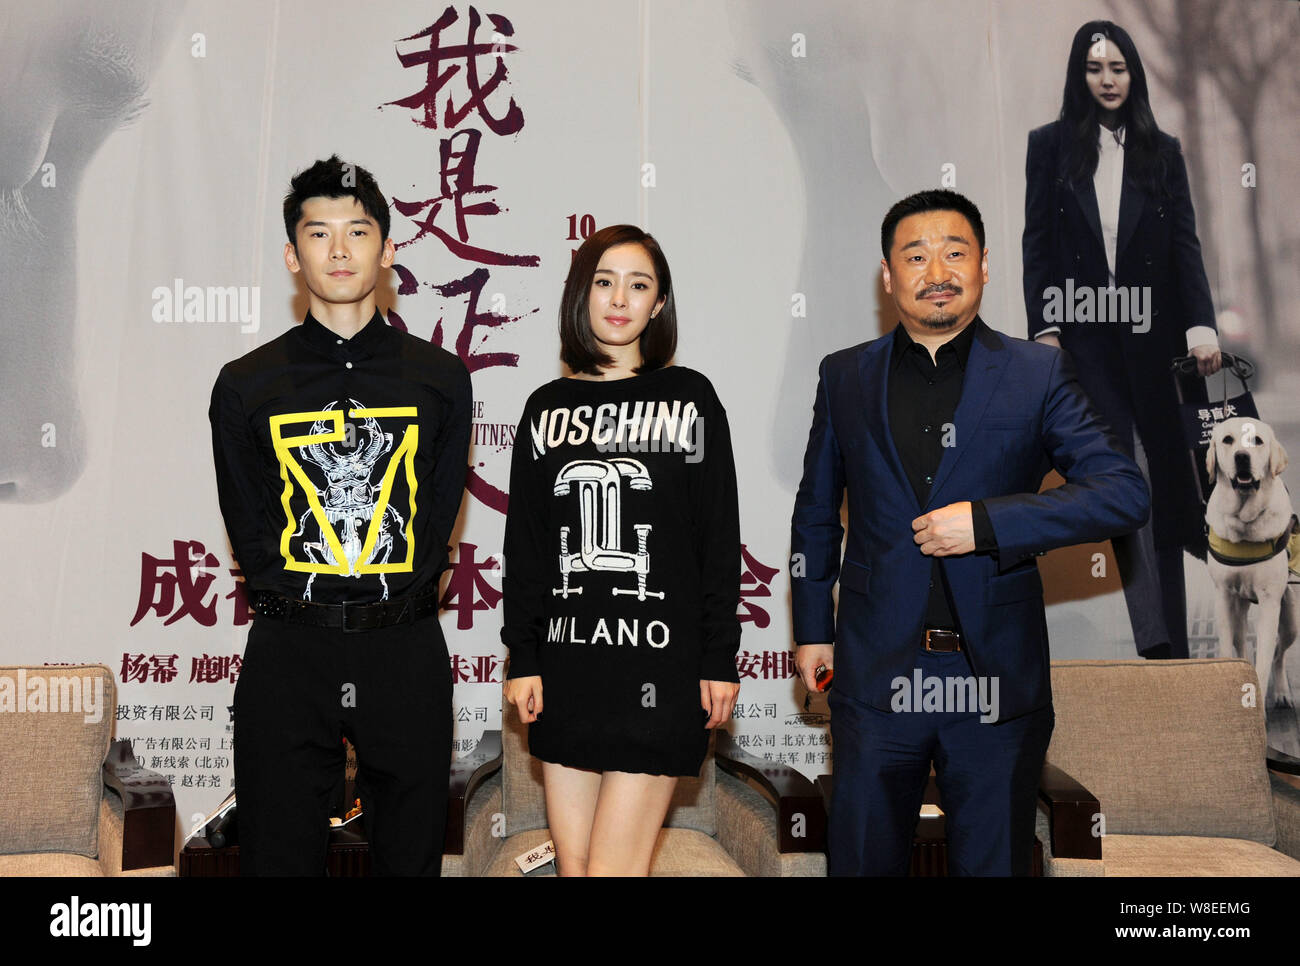 (From left) Chinese actor Liu Ruilin, actress Yang Mi and actor Wang Jingchun attend a press conference for their movie "The Witness" in Chengdu city, Stock Photo